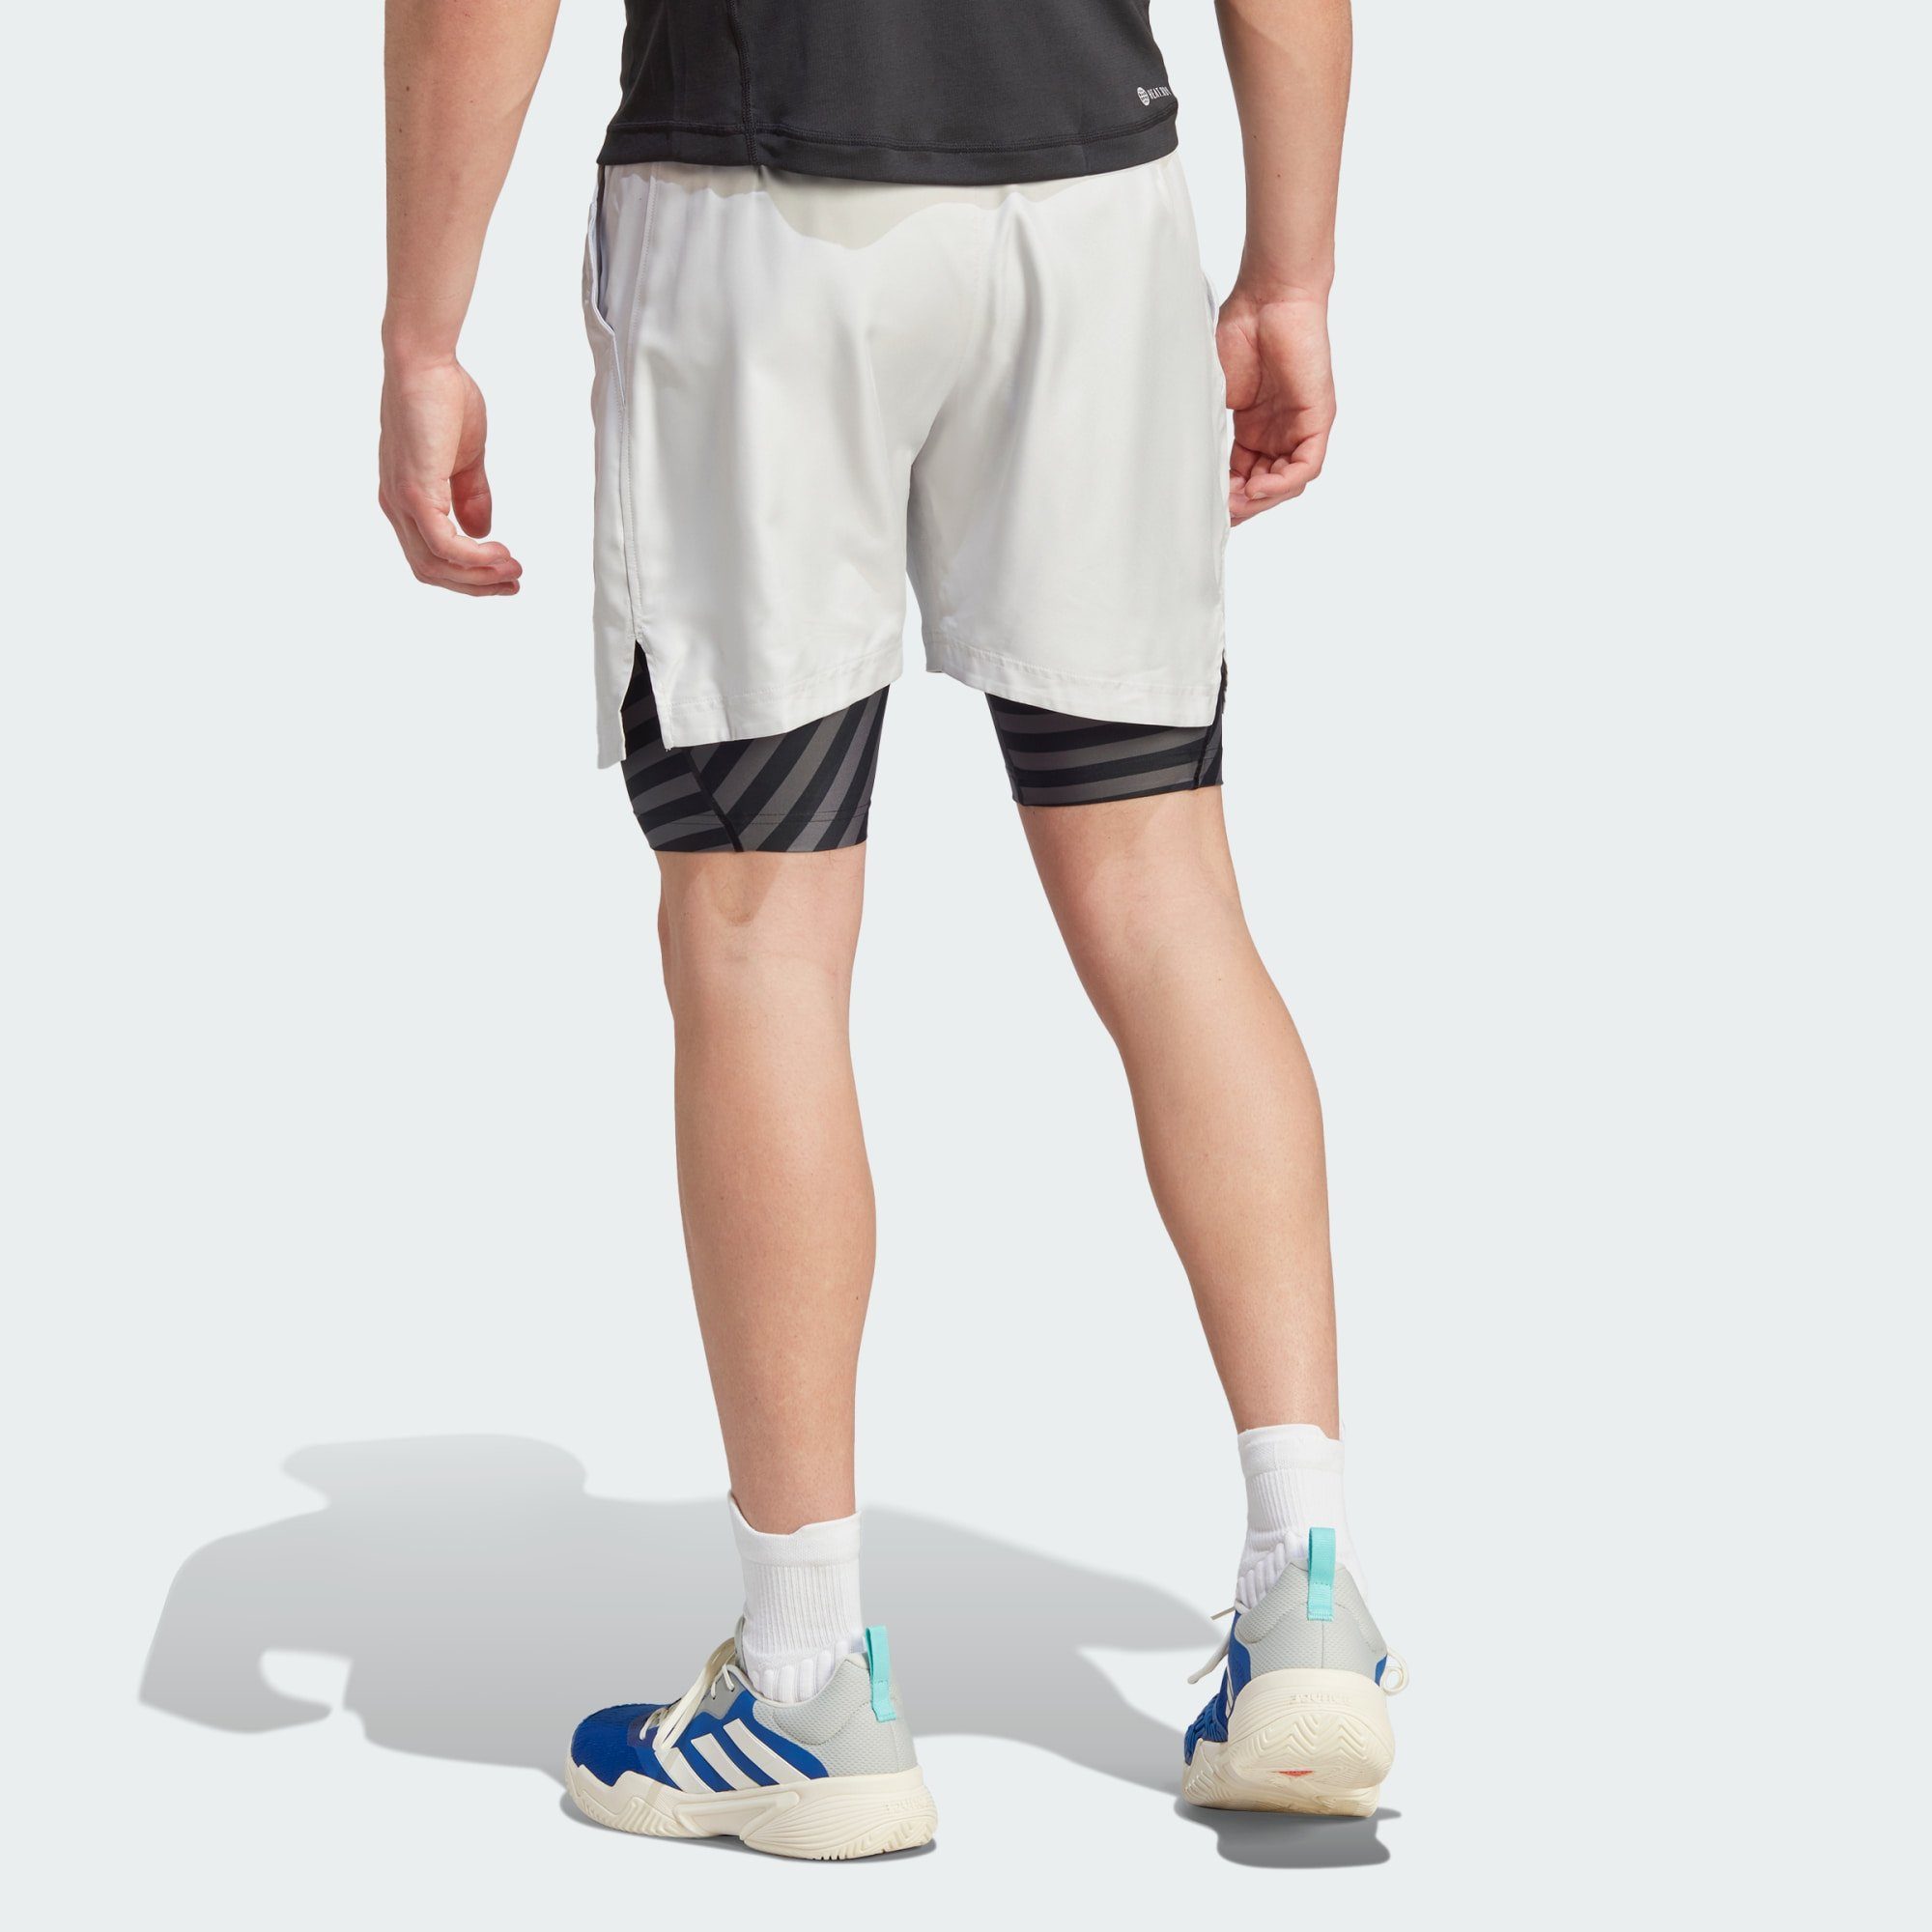 Grey PRO adidas TENNIS / AEROREADY TWO-IN-ONE Performance One One Funktionsshorts SHORTS Grey